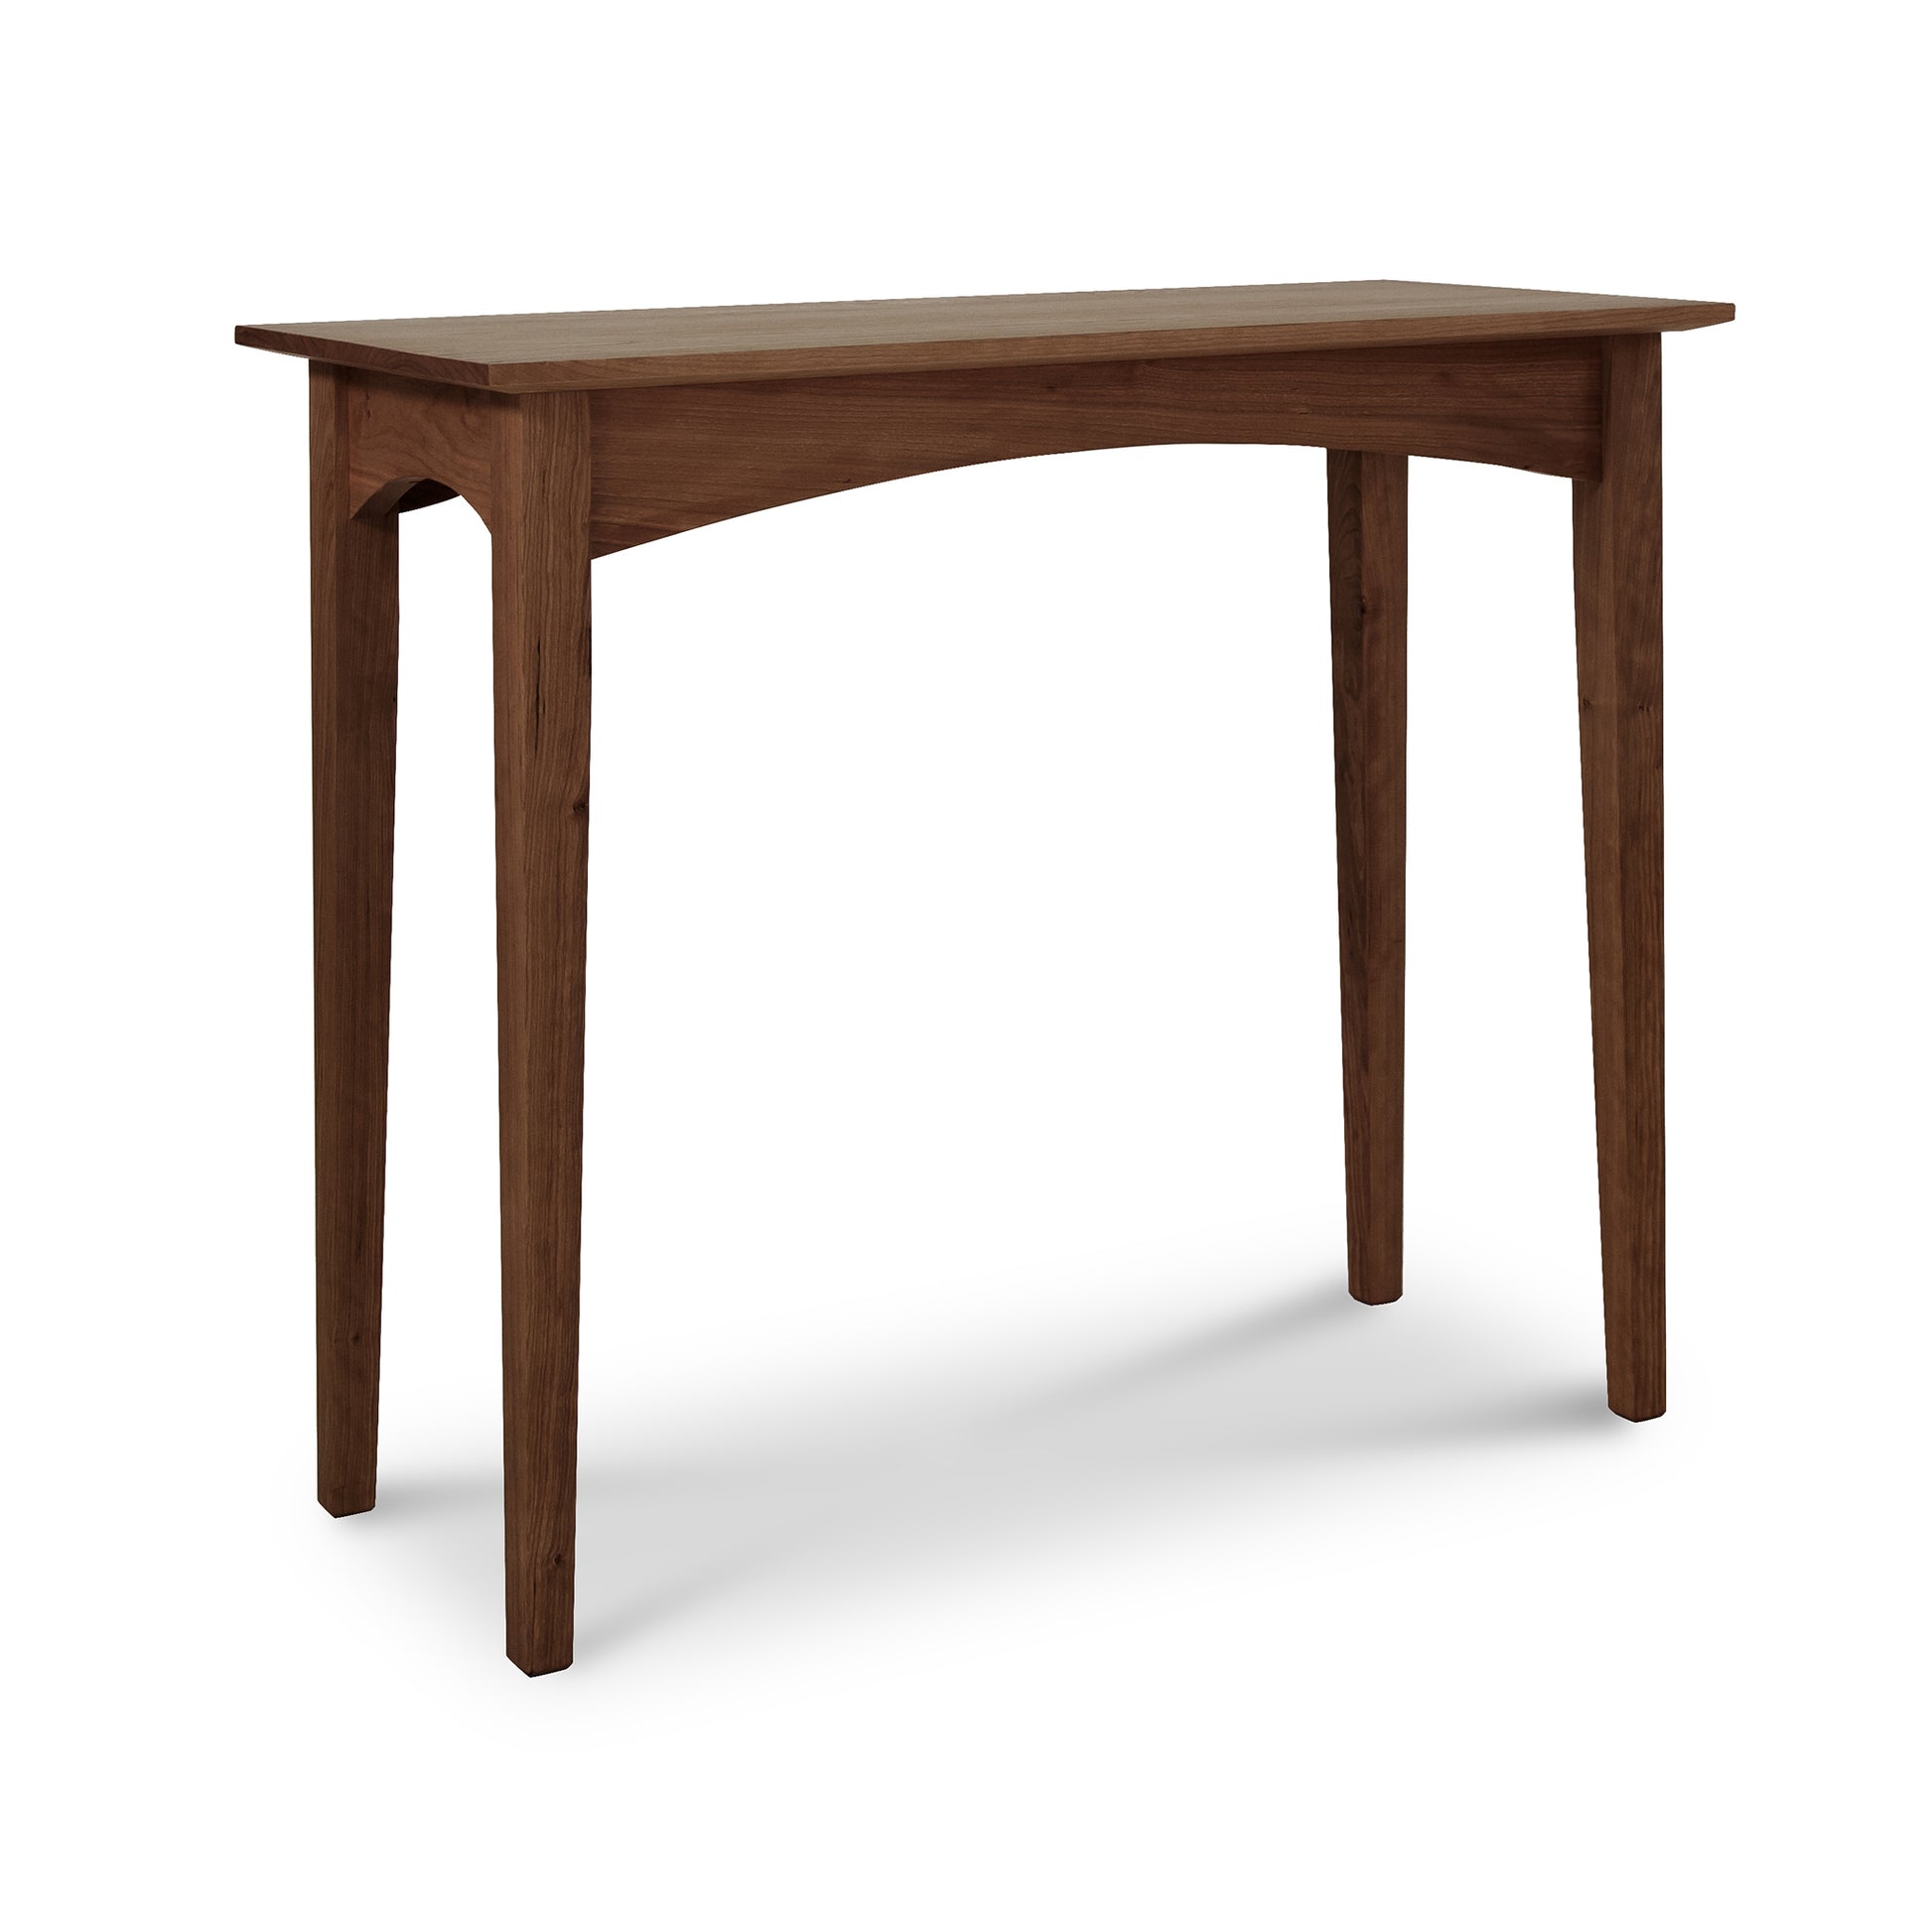 A American Shaker Sofa Table from Maple Corner Woodworks with four legs on a white background.